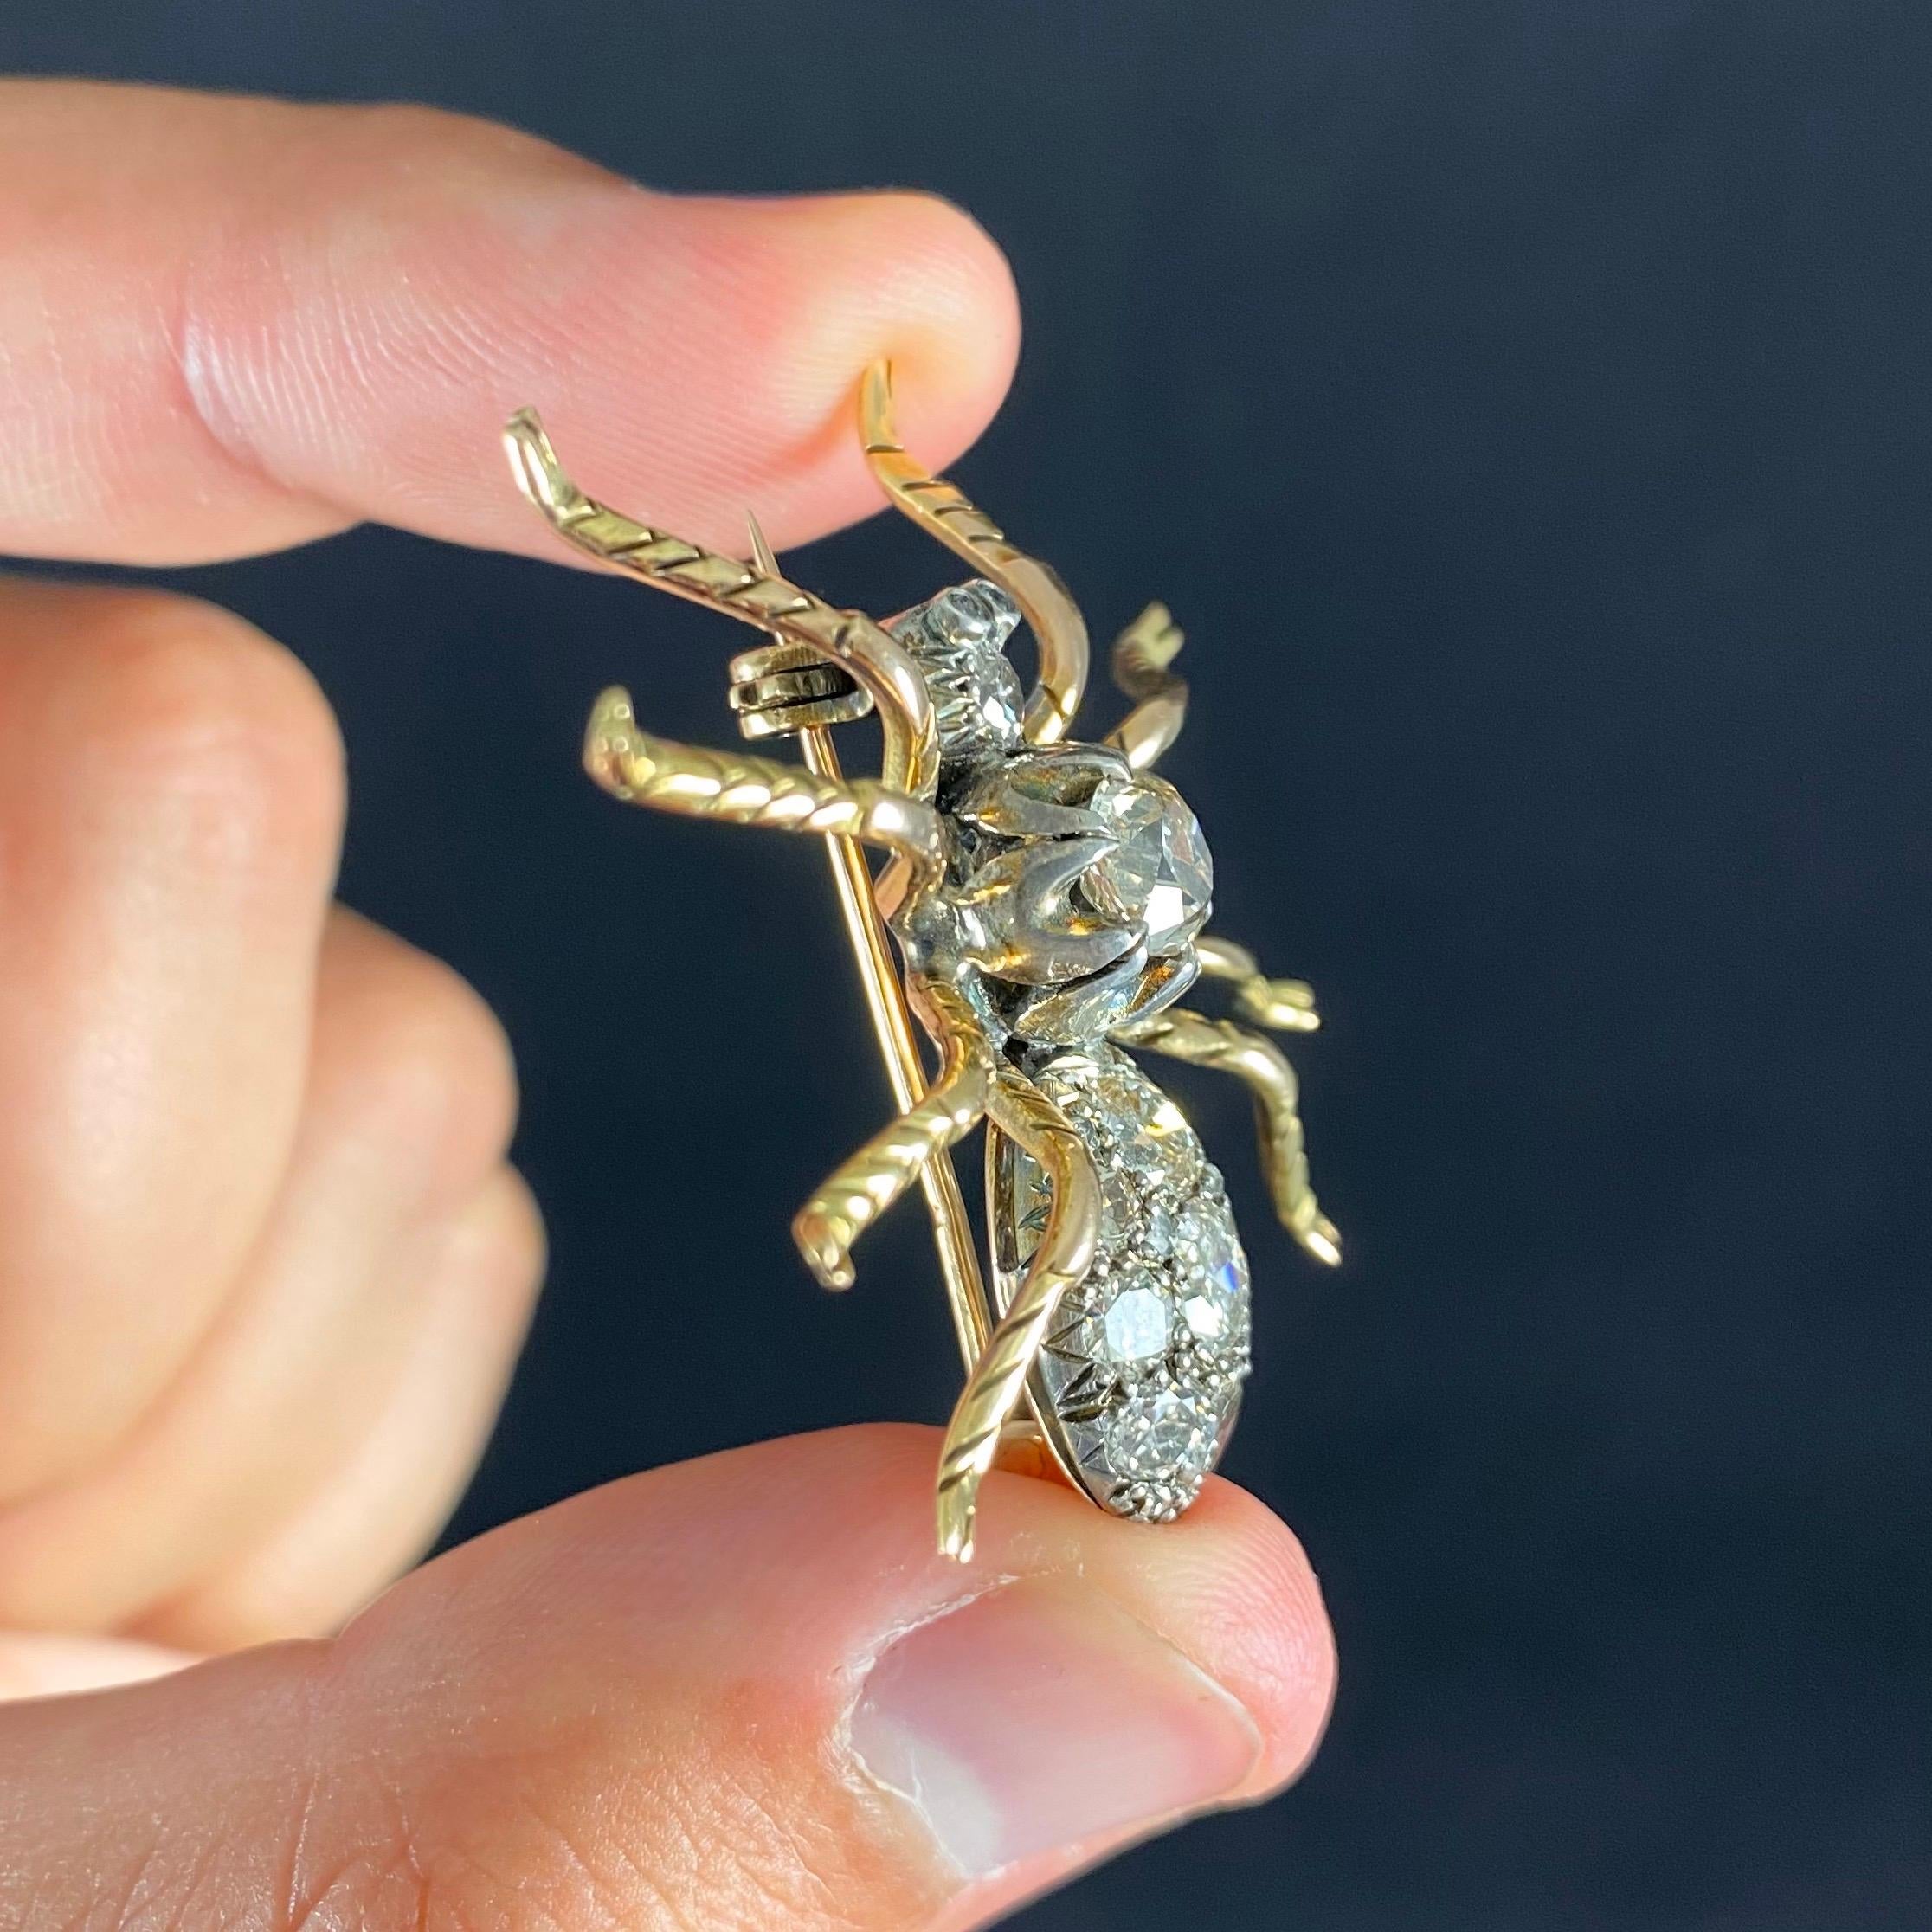 Retro 1940s Tarantula Spider Old Cut Pave Diamond Brooch Silver Yellow Gold In Good Condition For Sale In Lisbon, PT